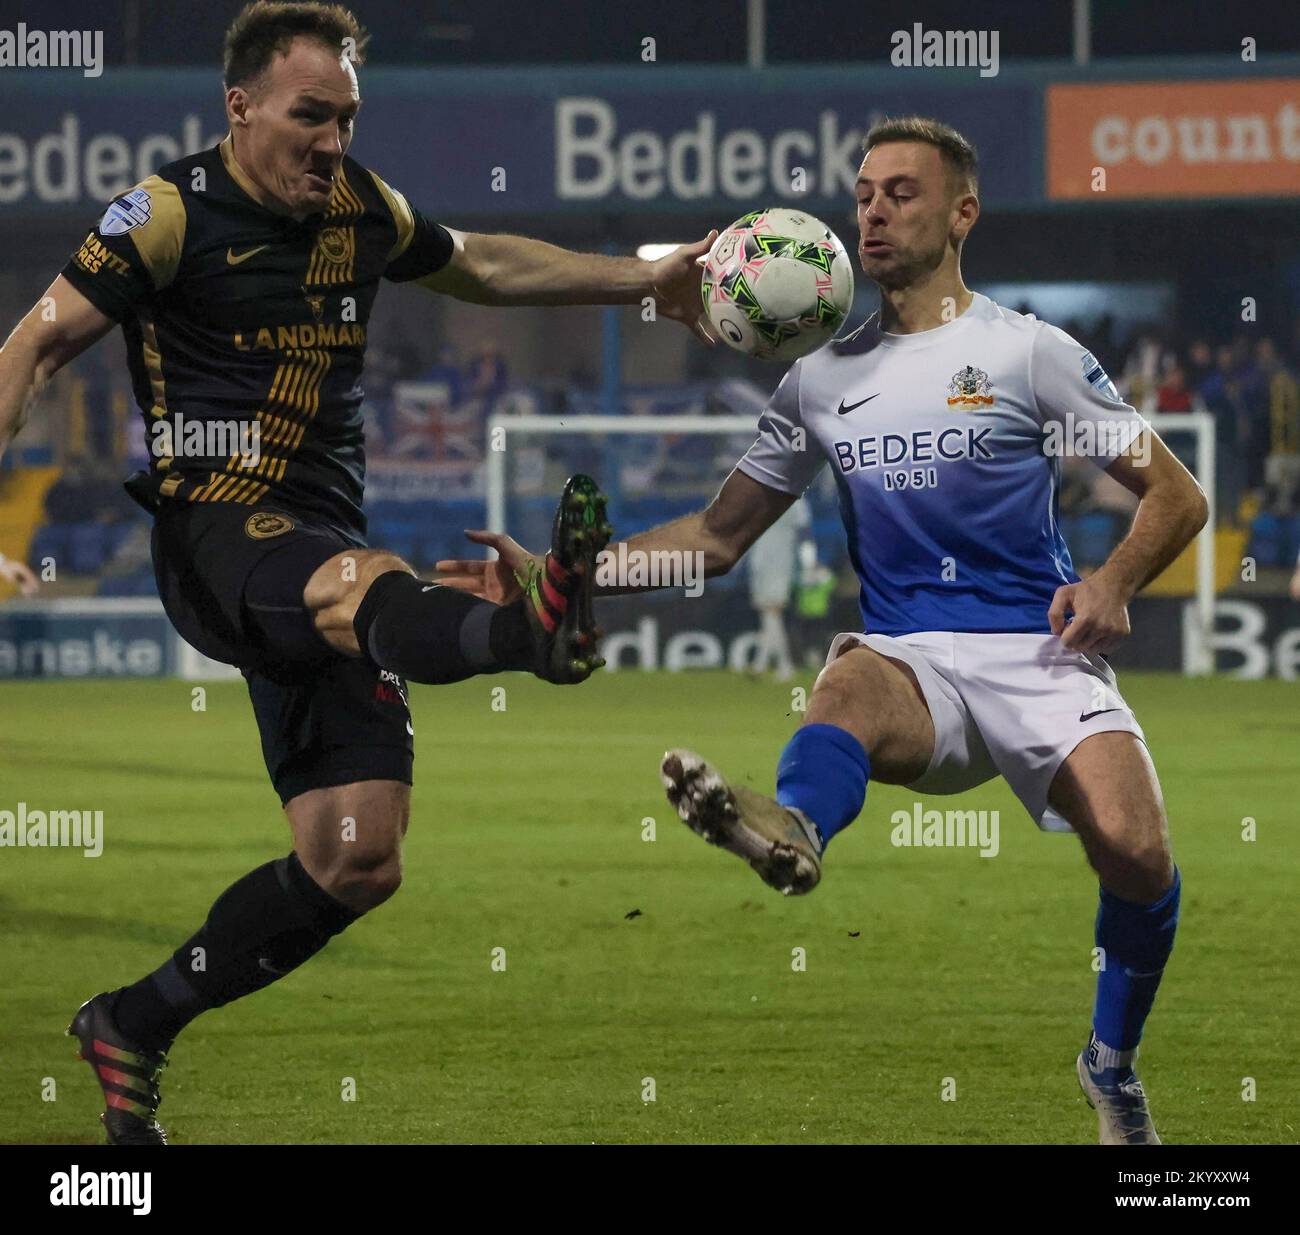 Mourneview Park, Lurgan, County Armagh, Northern Ireland, UK. 2 Dec 2022. Danske Bank Premiership – Glenavon v Larne Action from tonight's game at Mourneview Park (Glenavon in blue). Albert Waton  Larne (left) with Matthew Fitzpatrick. Credit: CAZIMB/Alamy Live News. Stock Photo